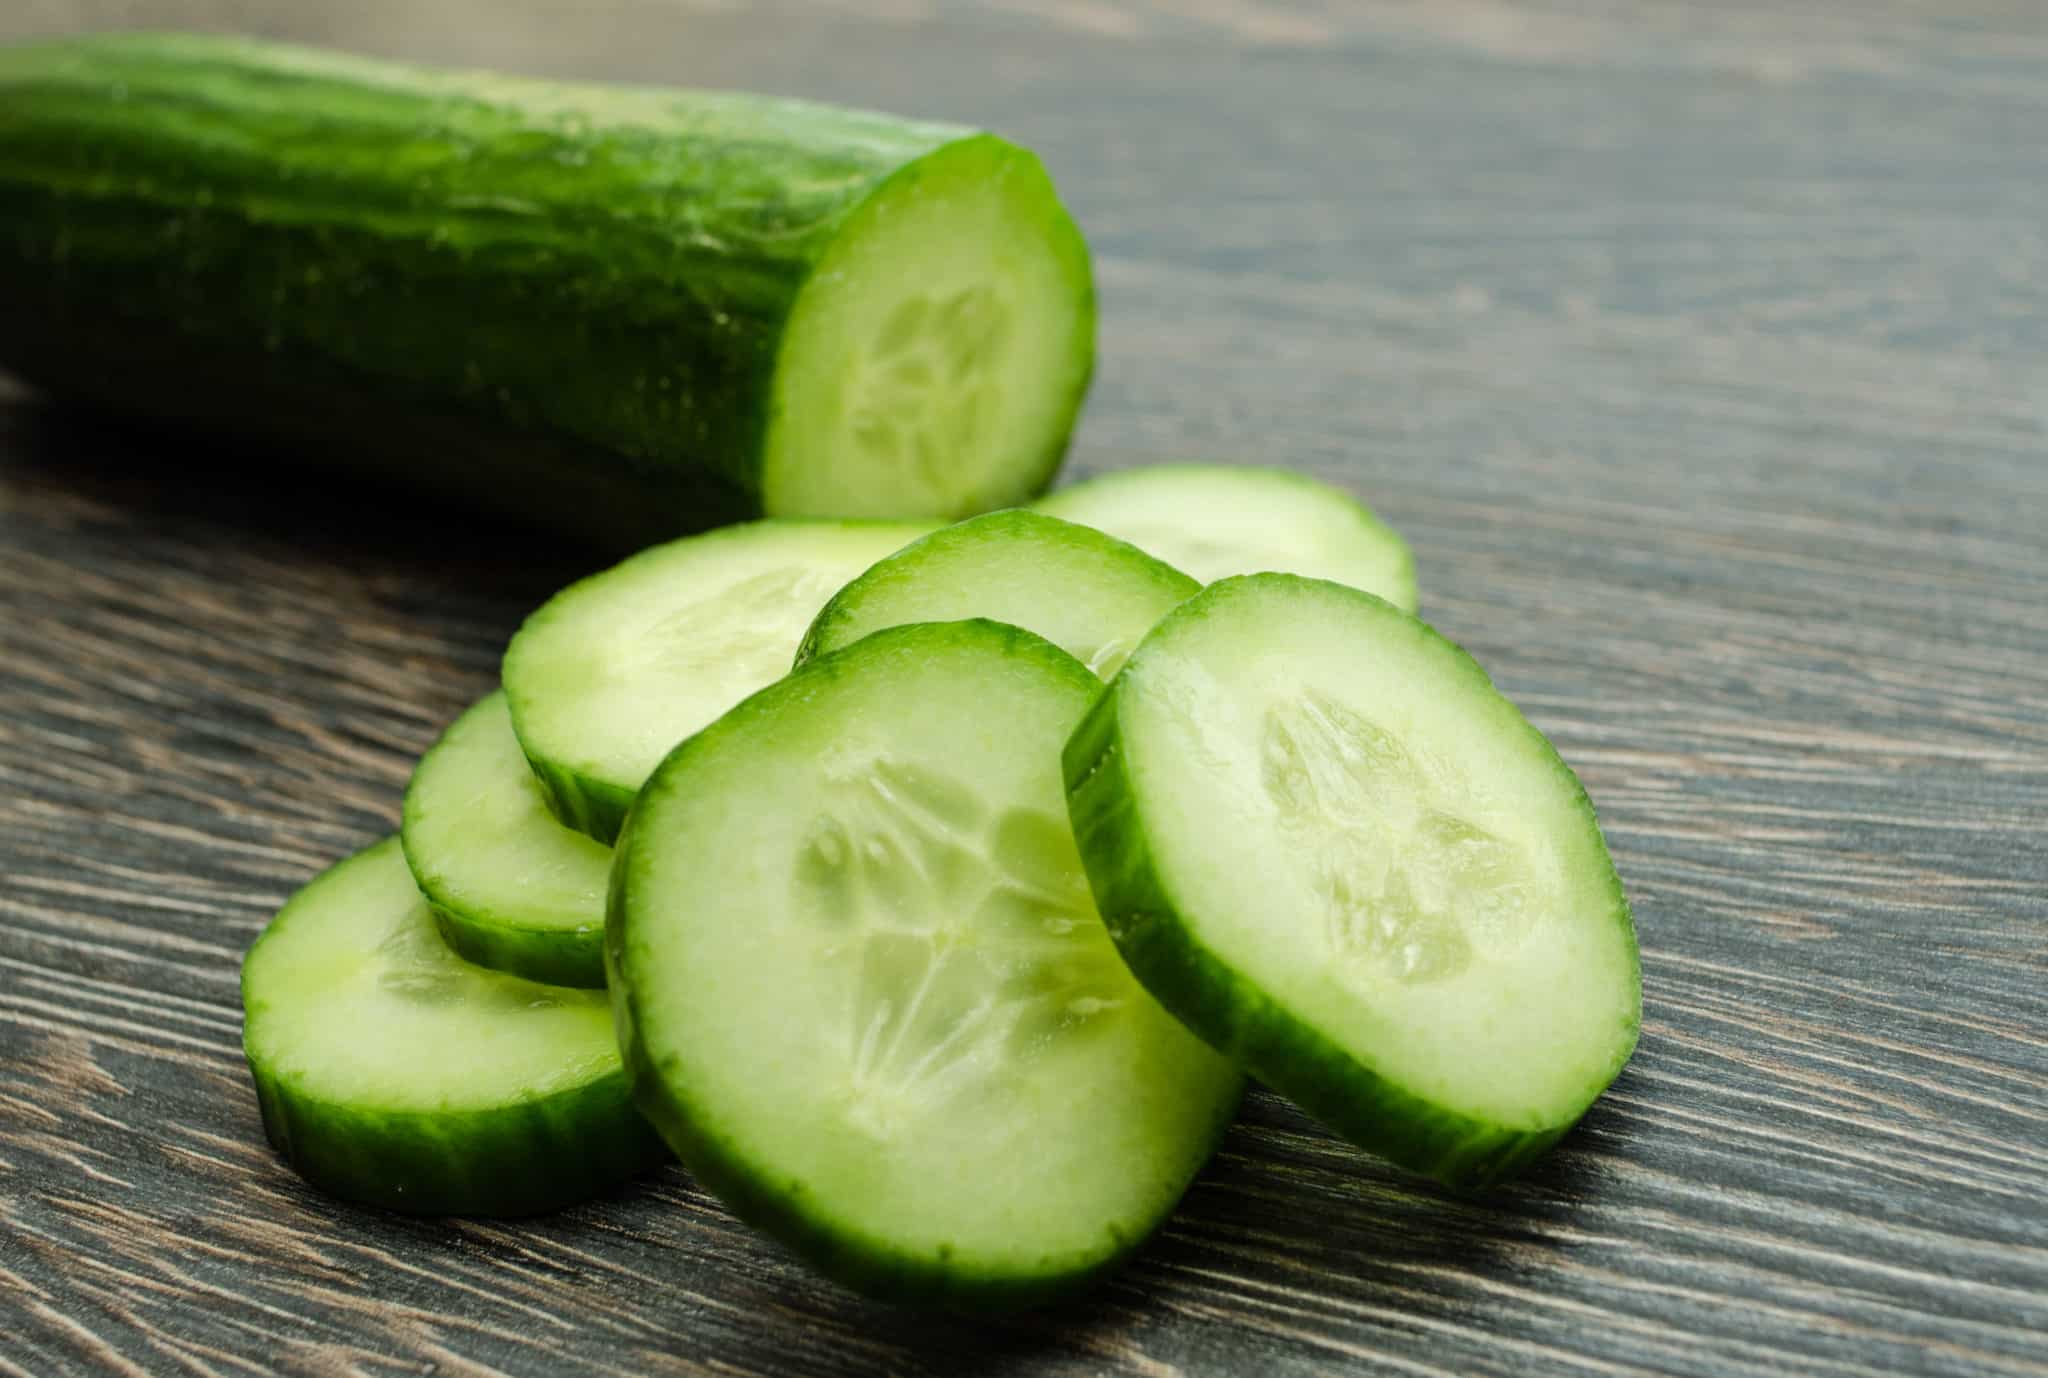 Sliced cucumber on wooden table